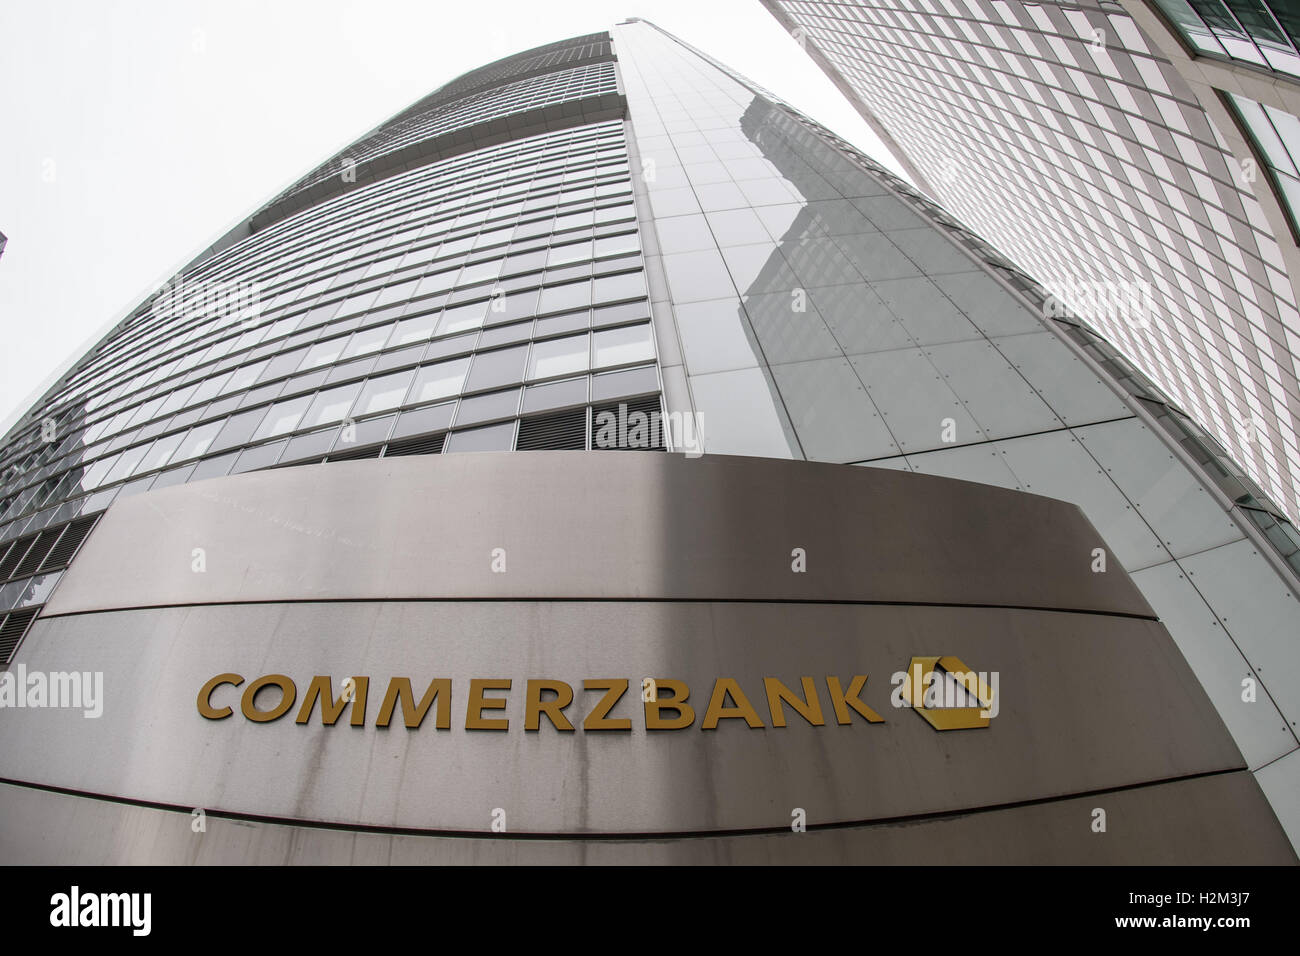 The Commerzbank headquarters in Frankfurt am Main, Germany, 30 September 2016. At a press conference the management board wants to present details on the bank's strategic direction until 2020. Photo: BORIS ROESSLER/dpa Stock Photo